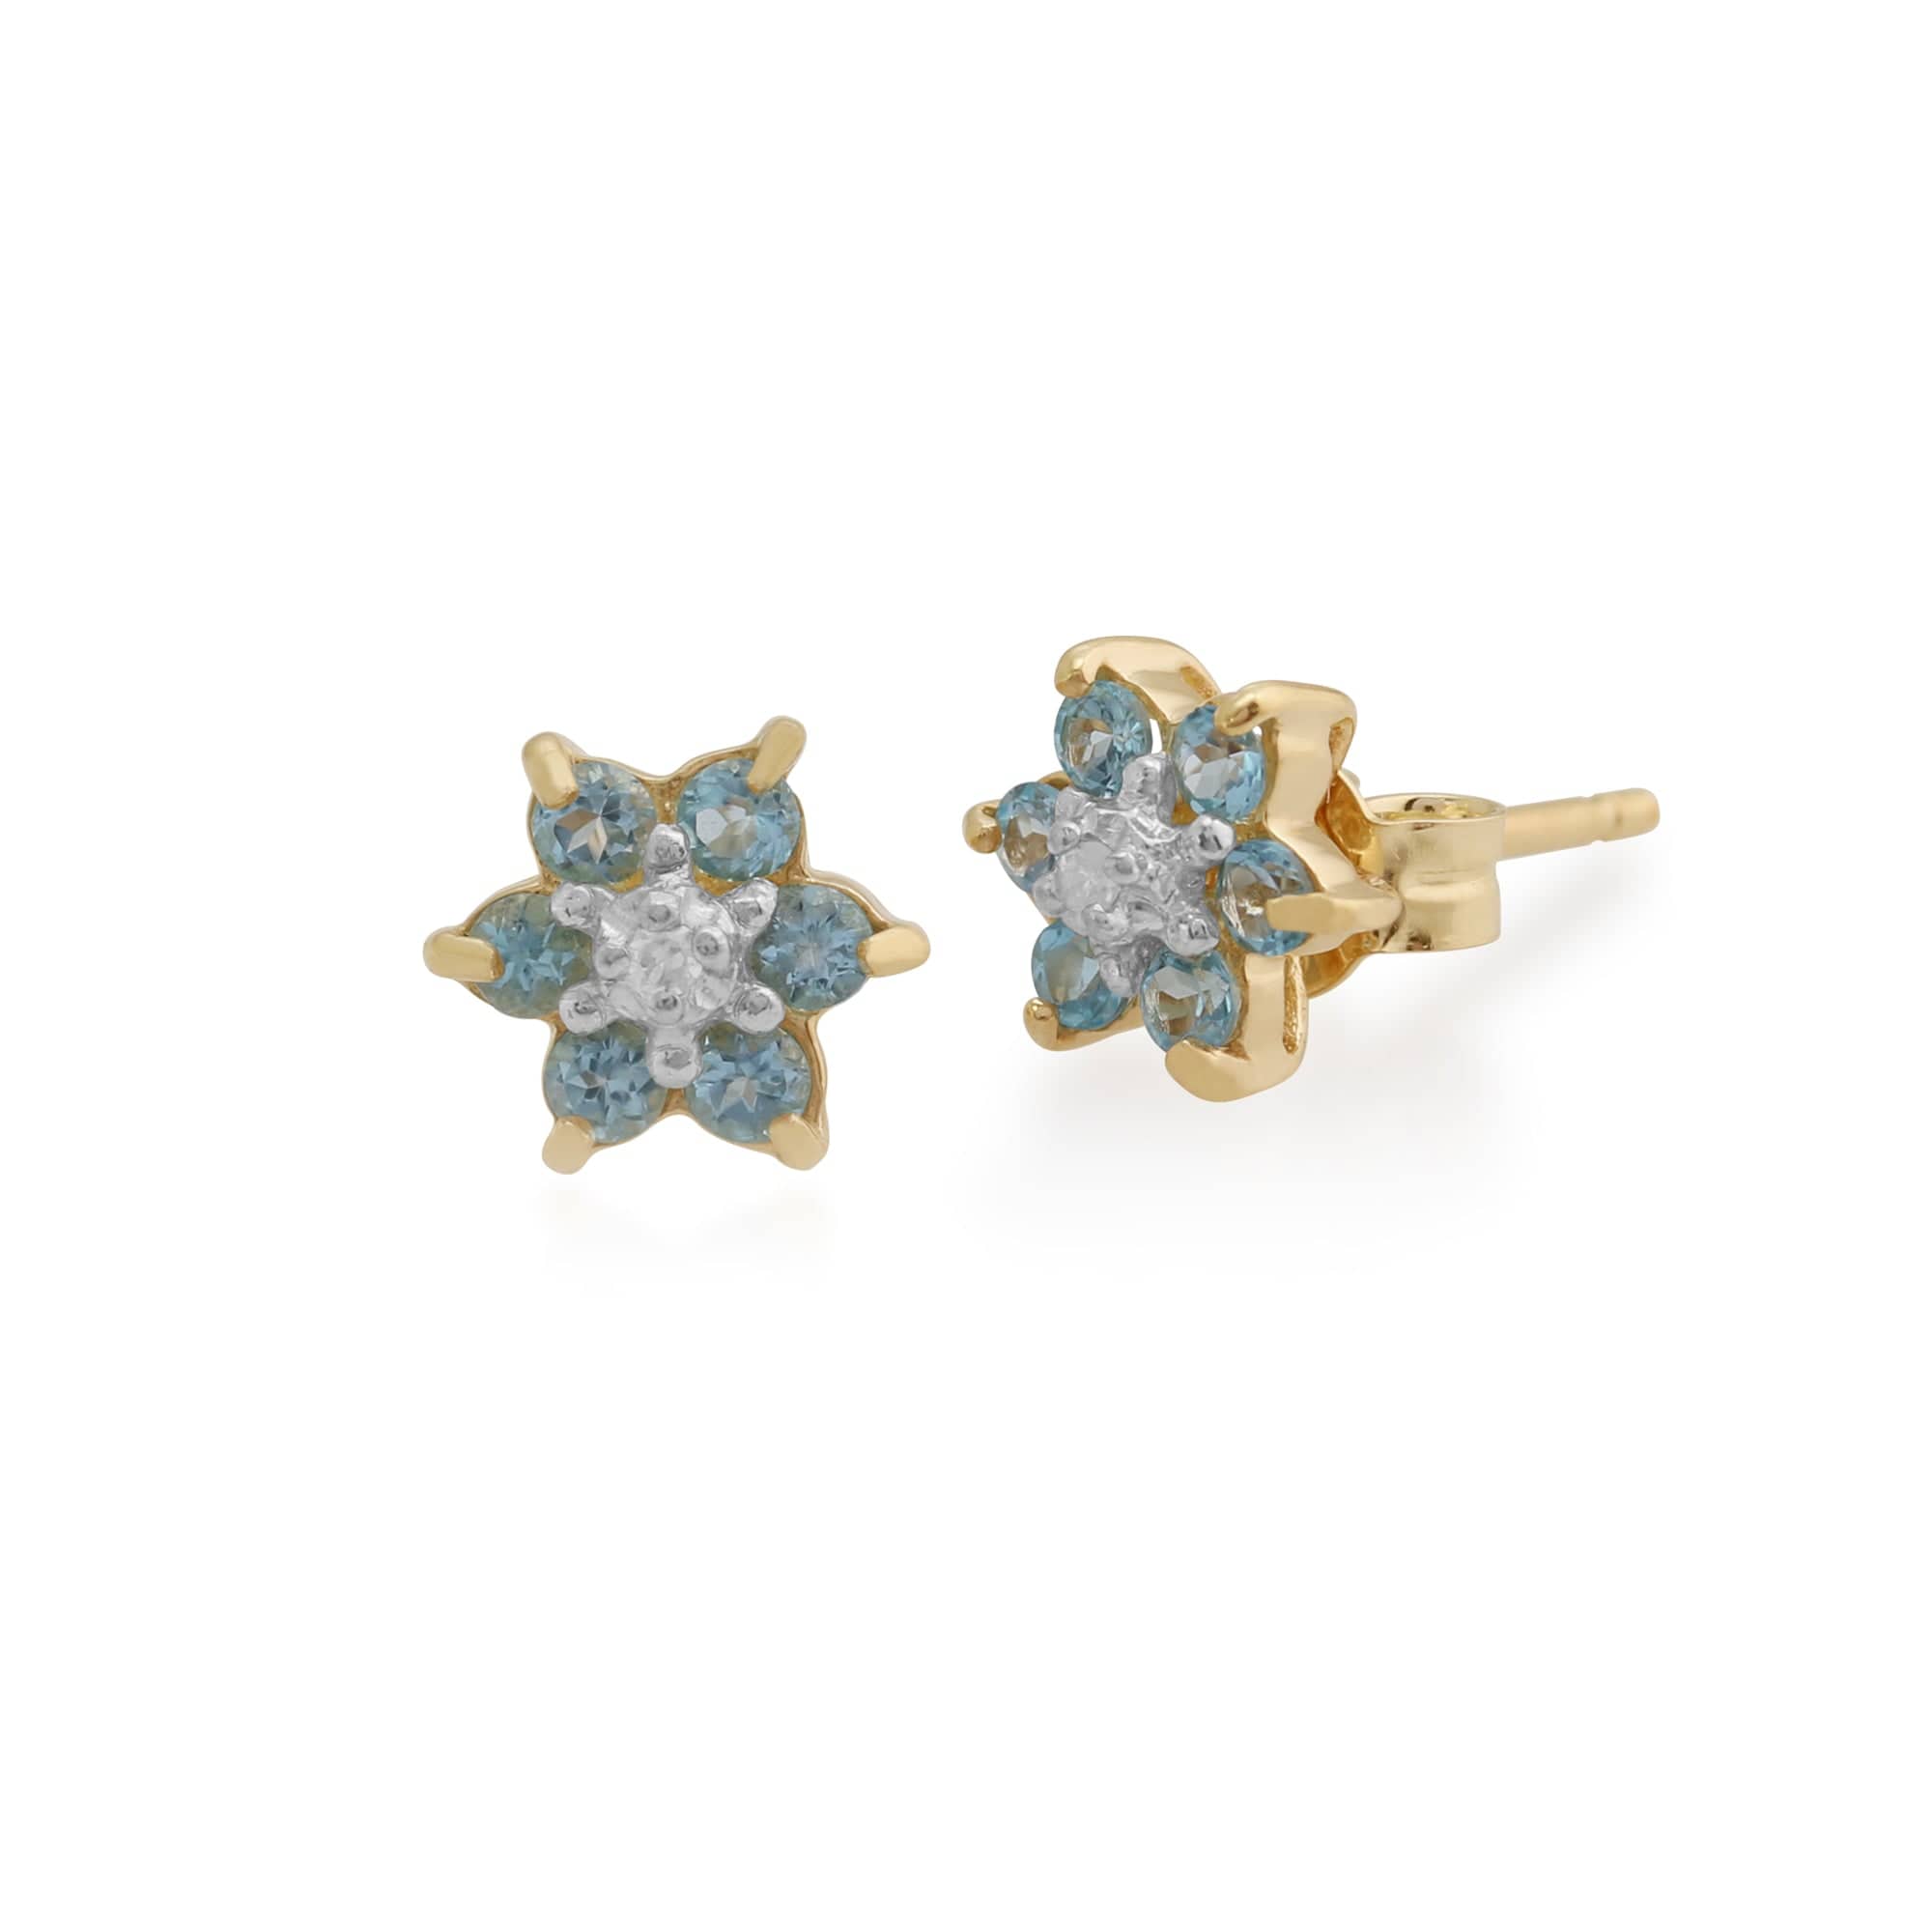 Floral Round Blue Topaz & Diamond Cluster Stud Earrings in 9ct Yellow Gold - Gemondo